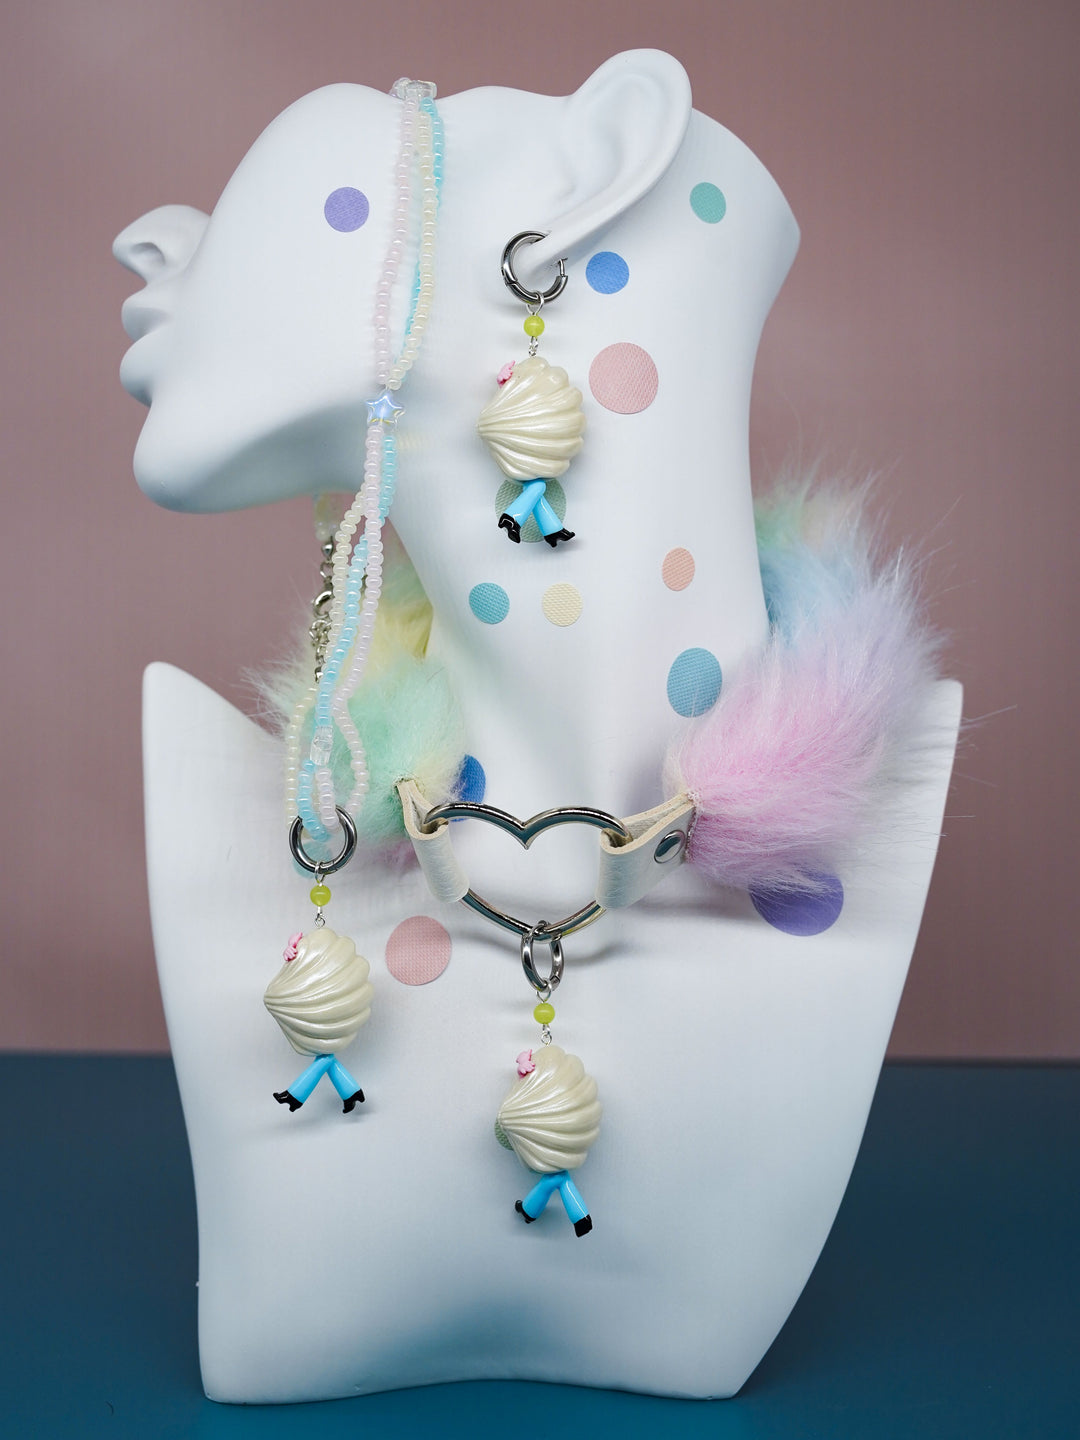 Mini necklace, Shy clam necklace,  Fairy pearl jewelry  Macaron color jewelry,  Necklace and earring set,  Mini clam pendant, Fairy pearl earrings,  Macaron-themed jewelrly,  Colorful jewelry set, Dainty necklace,